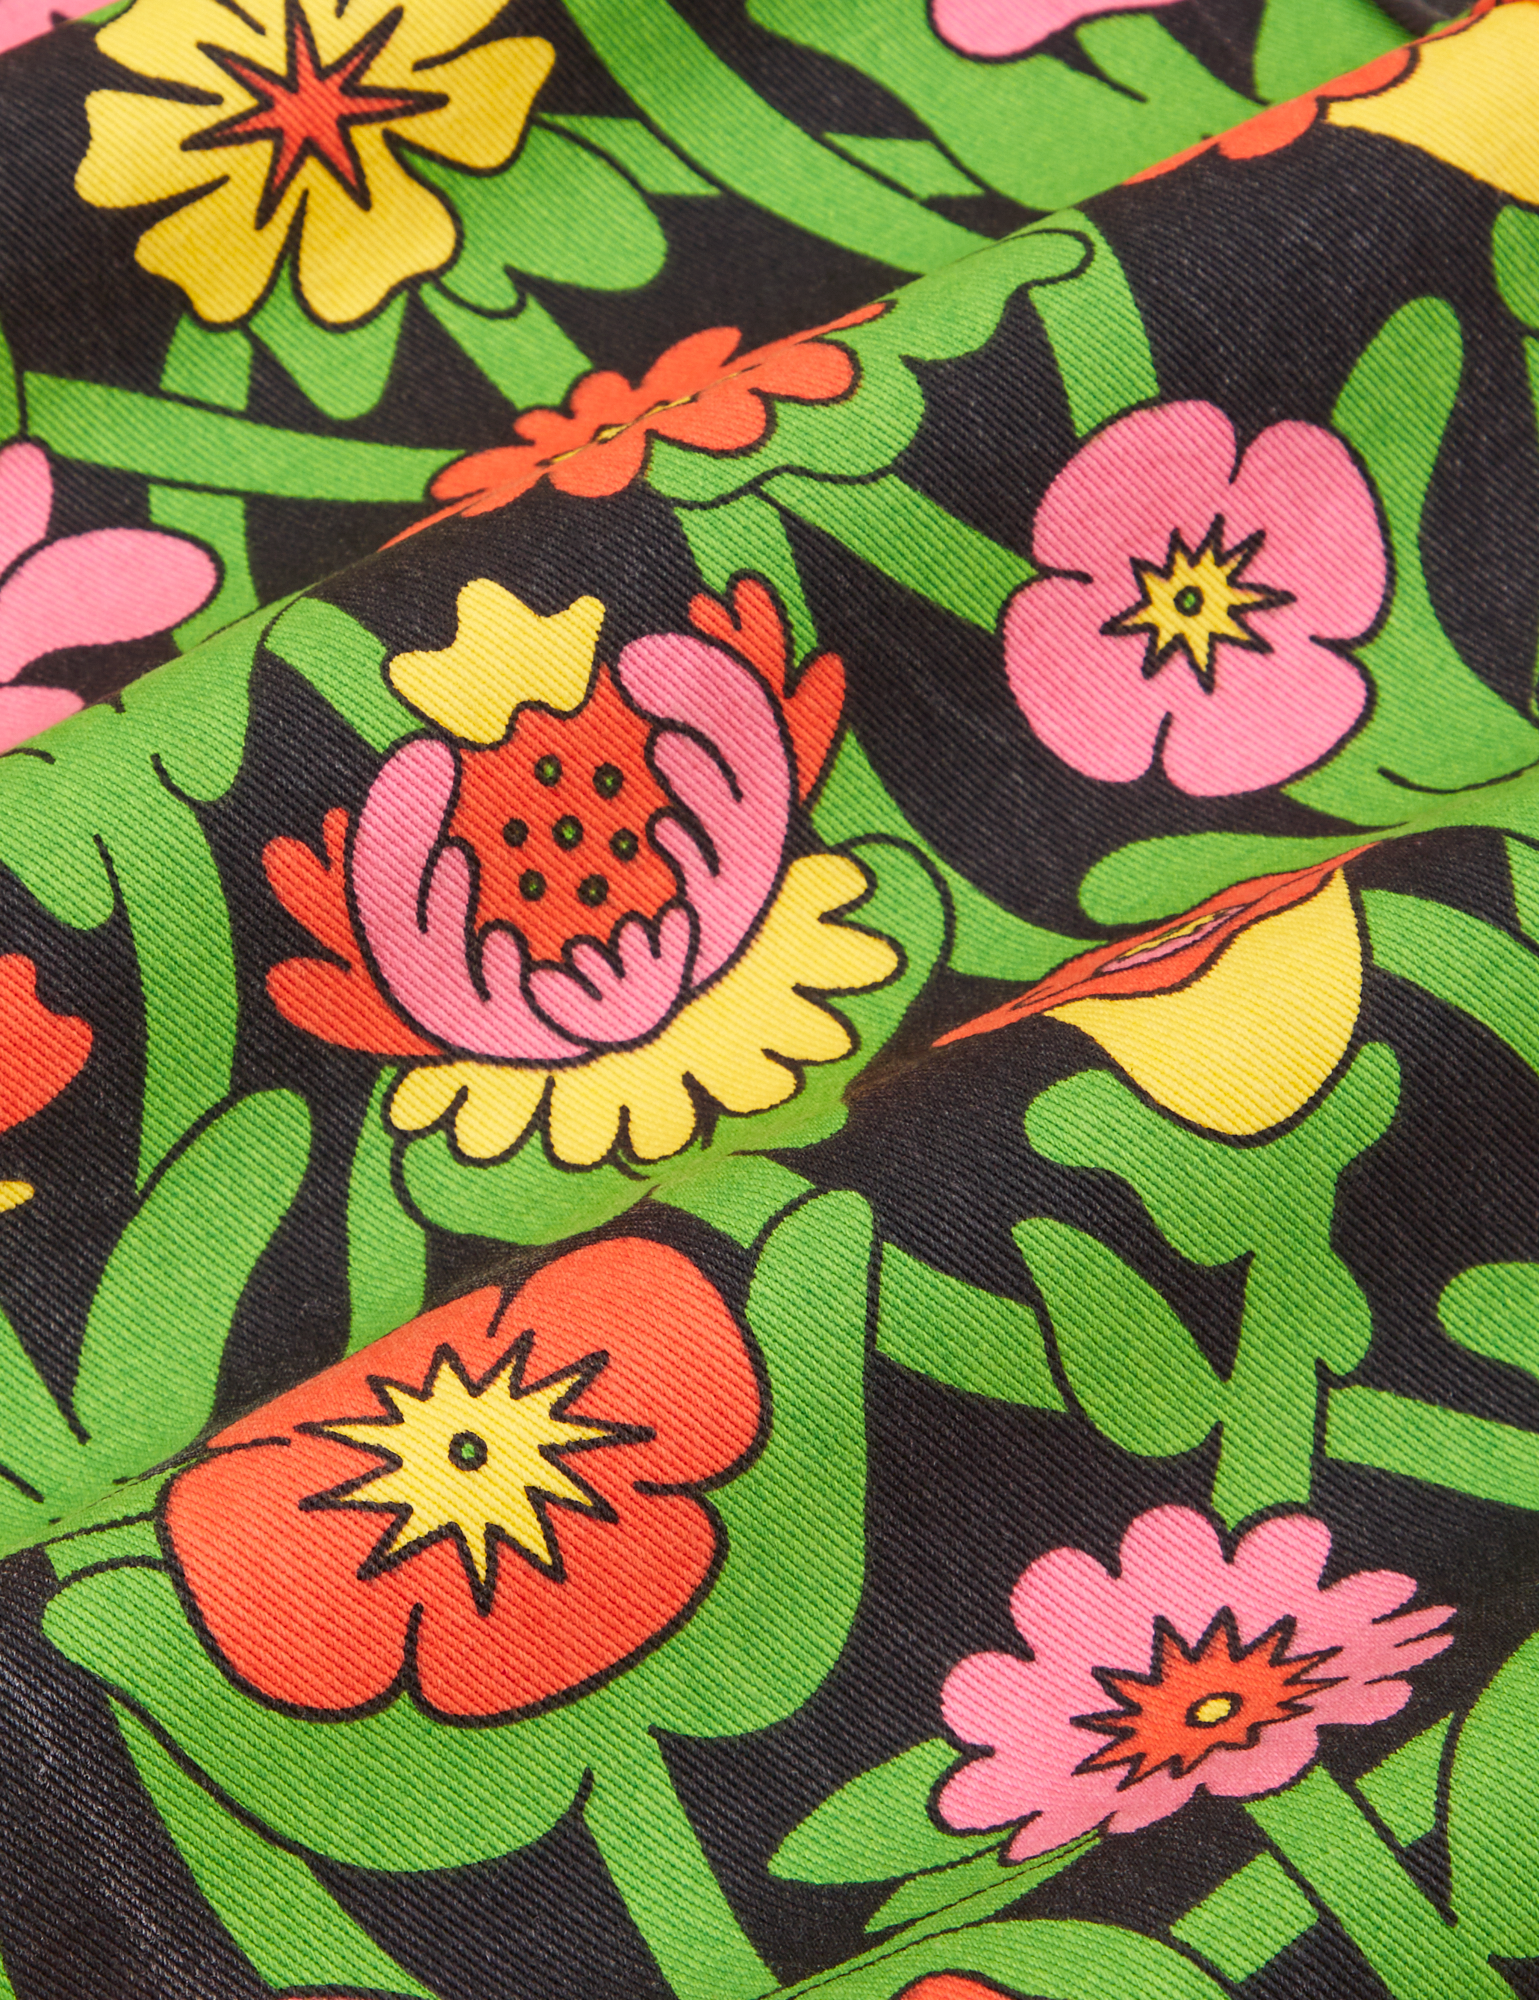 Work Pants in Flower Tangle fabric detail close up. Green vines with red and pink flowers.